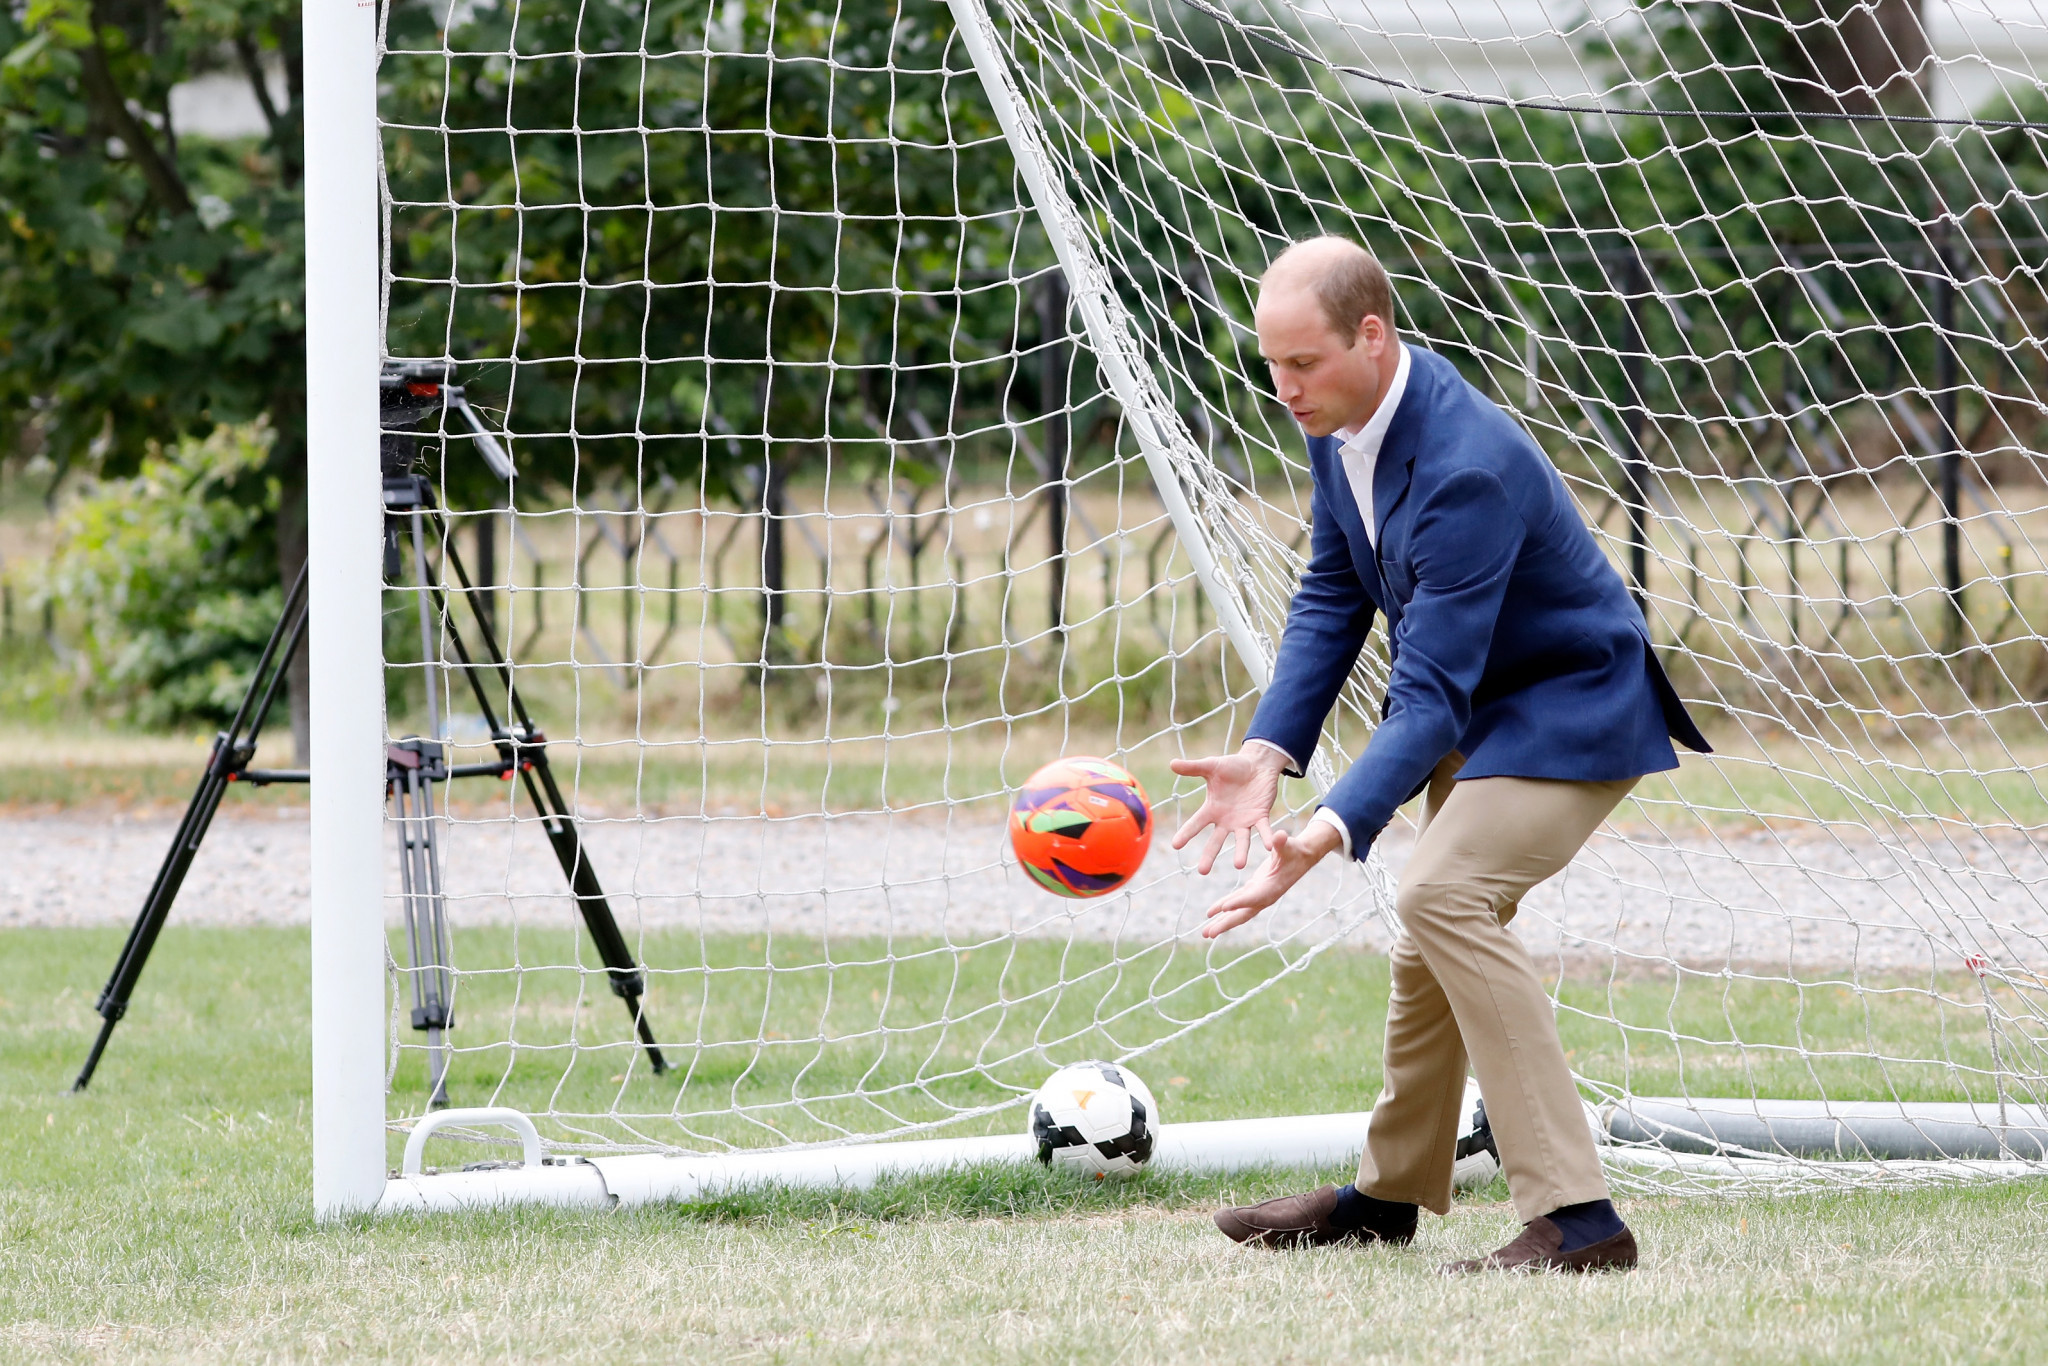 English FA President Prince William has reportedly already said he would not attend the World Cup in Russia ©Getty Images